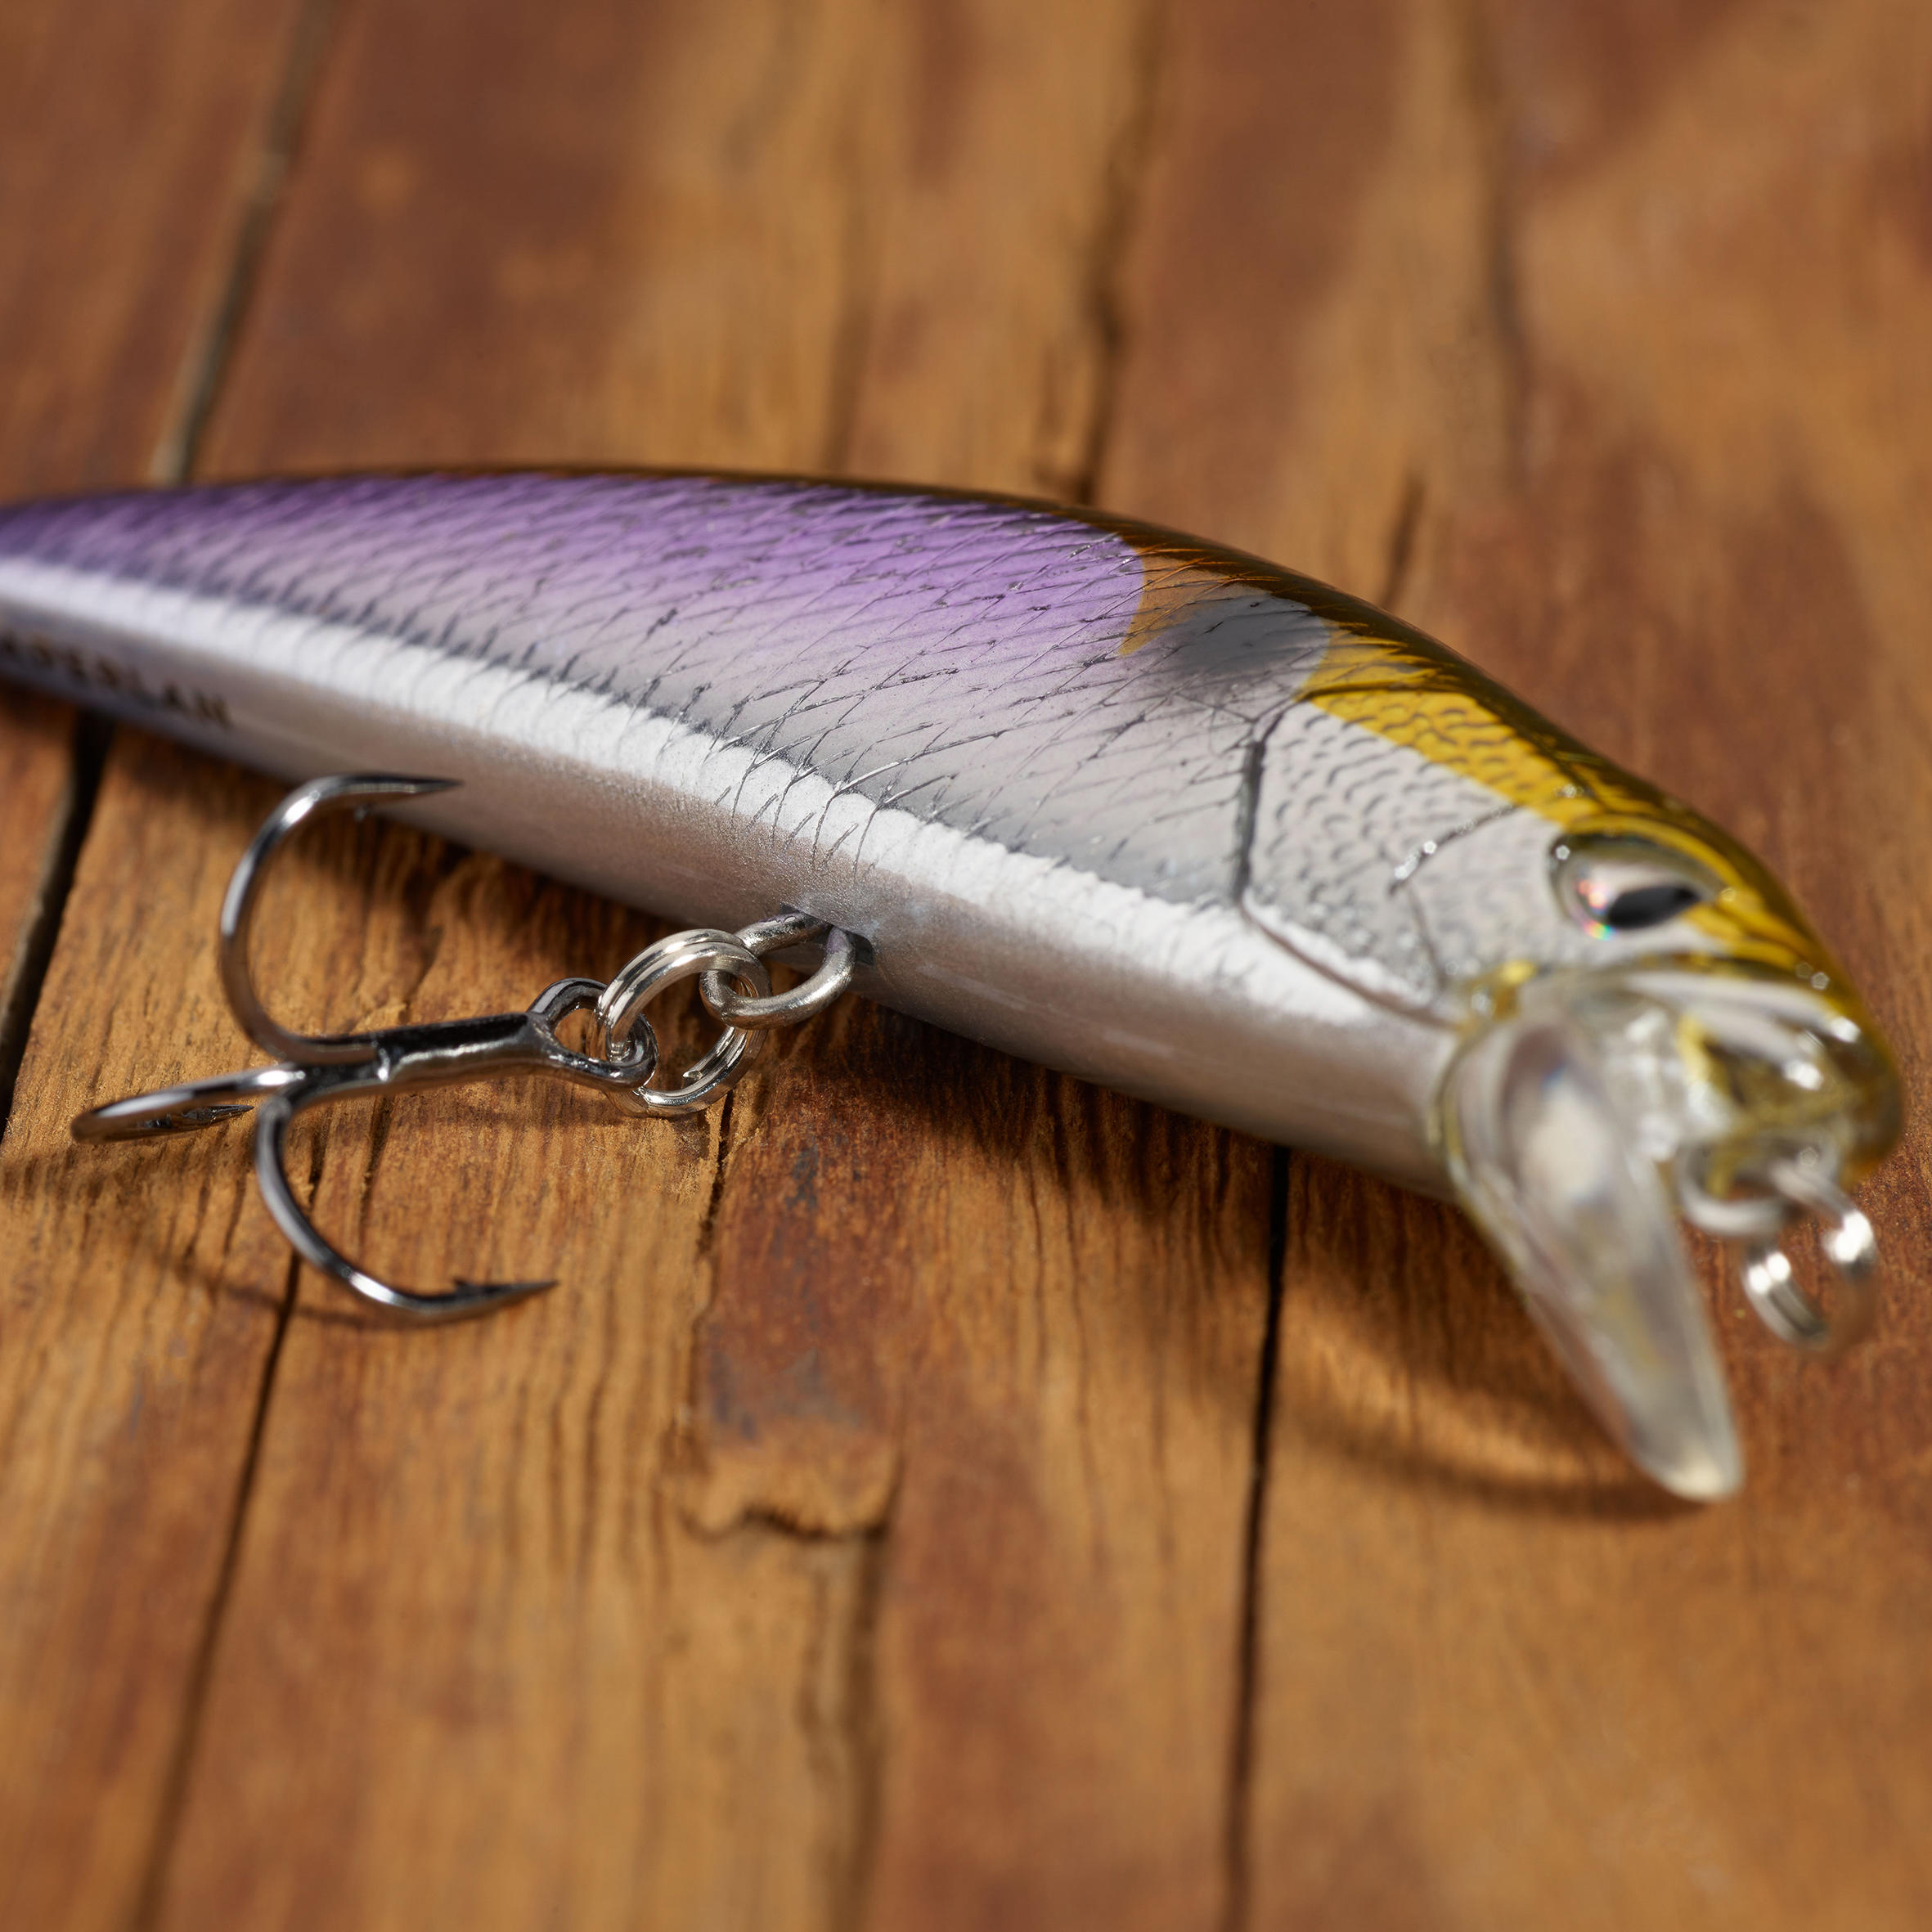 MINNOW HARD LURE FOR TROUT WXM  MNWFS US 65 FRY 3/4